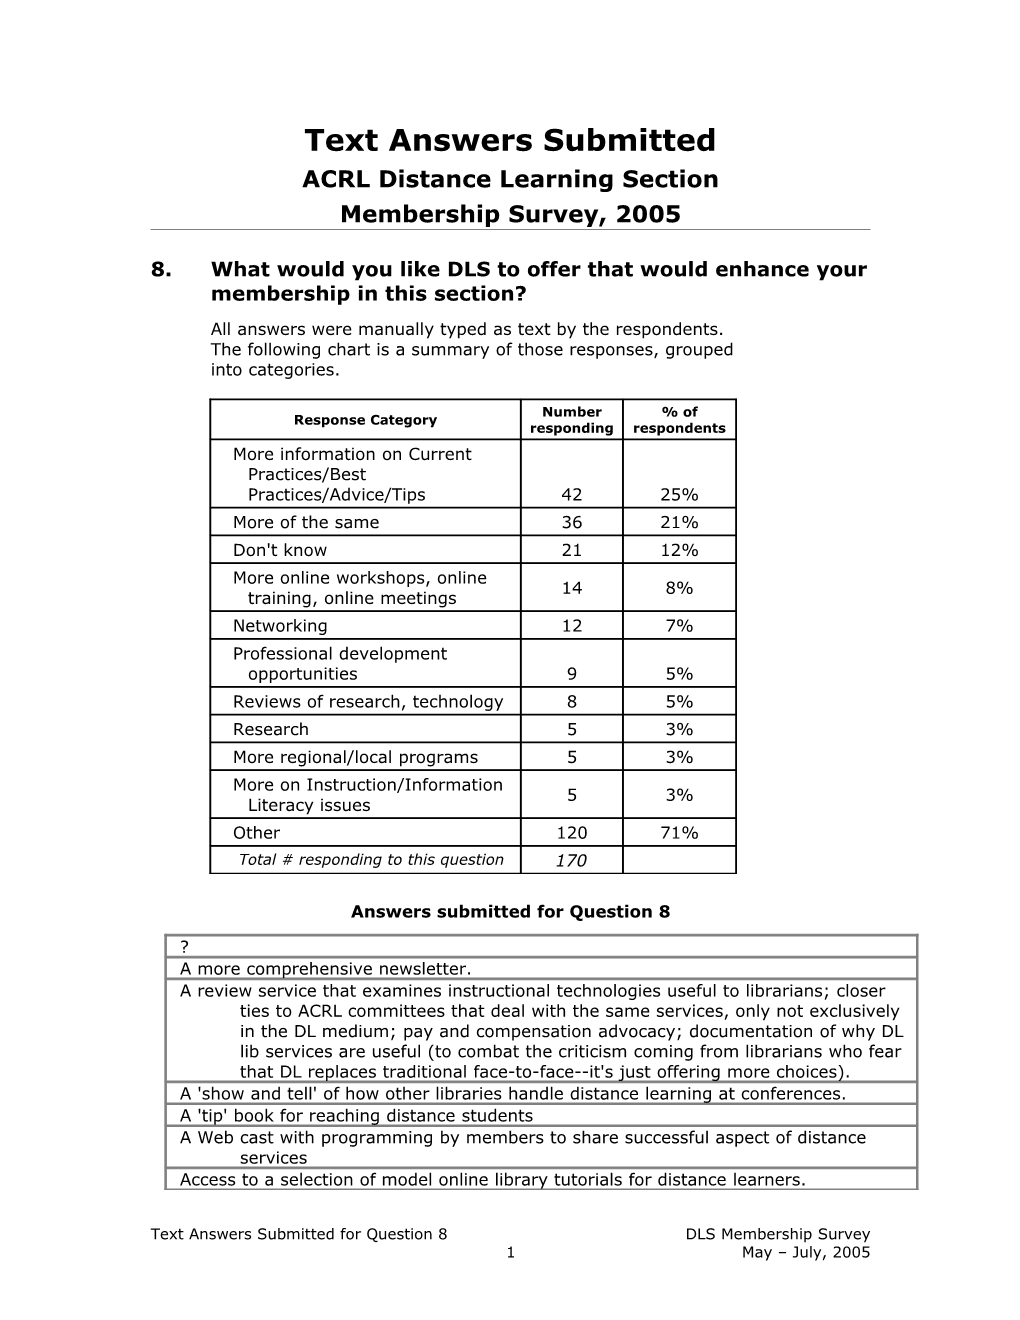 ACRL Distance Learning Section